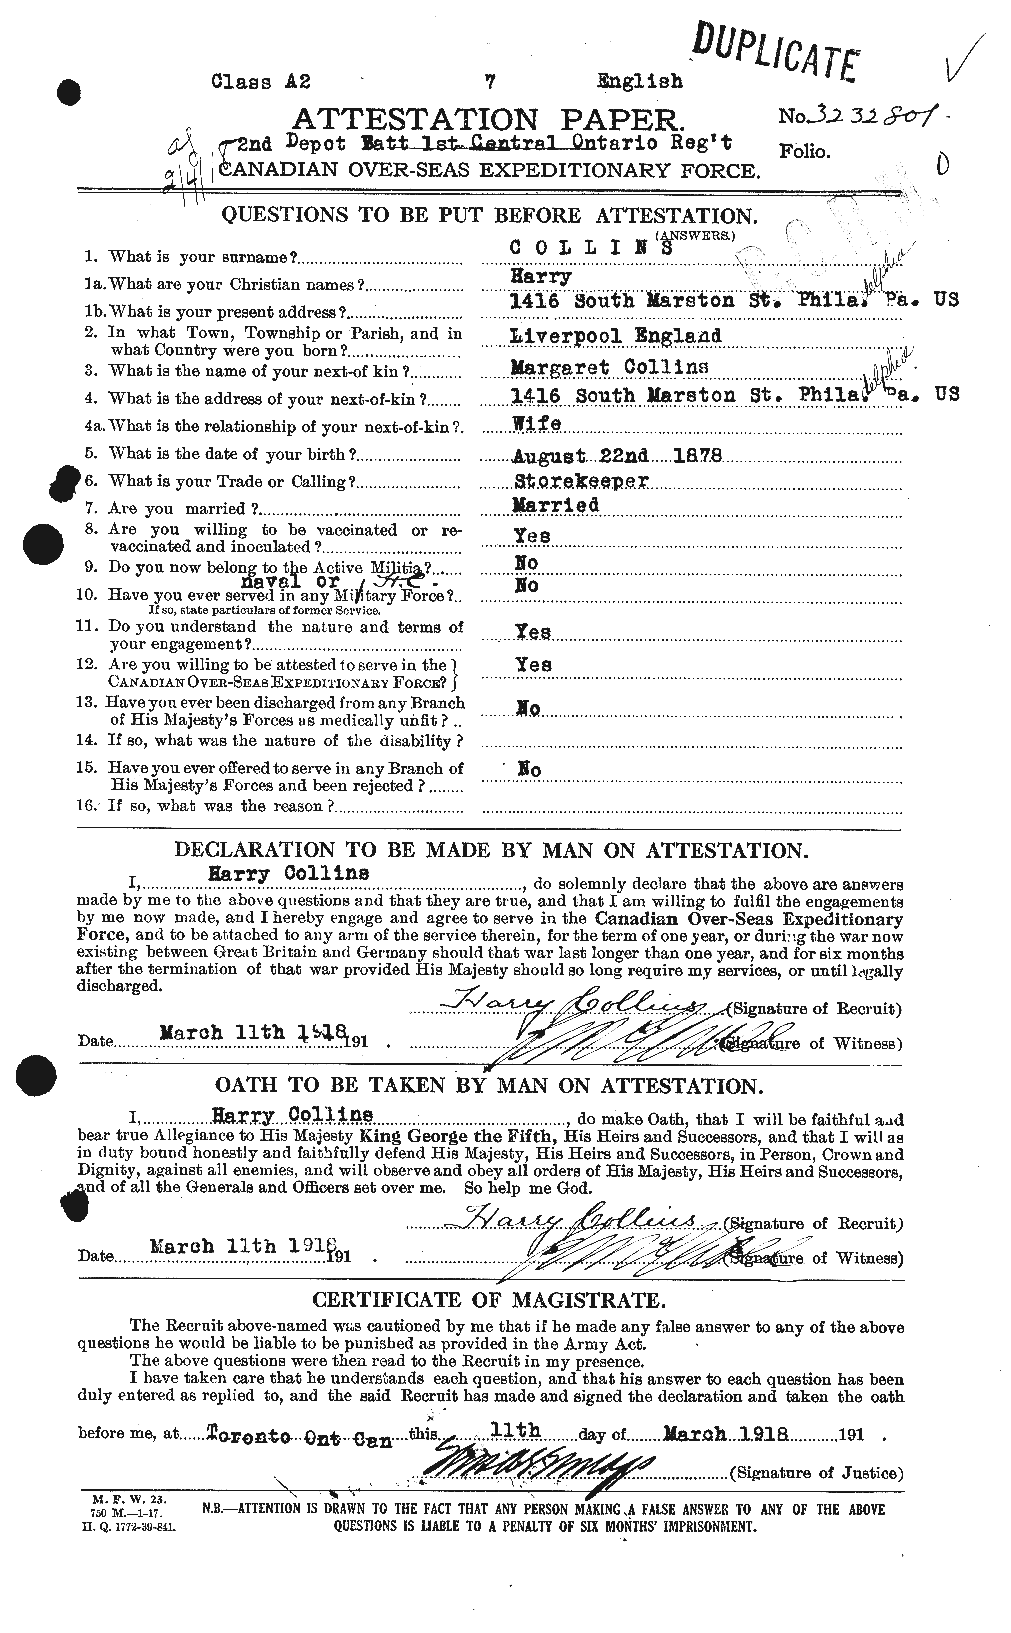 Personnel Records of the First World War - CEF 070023a